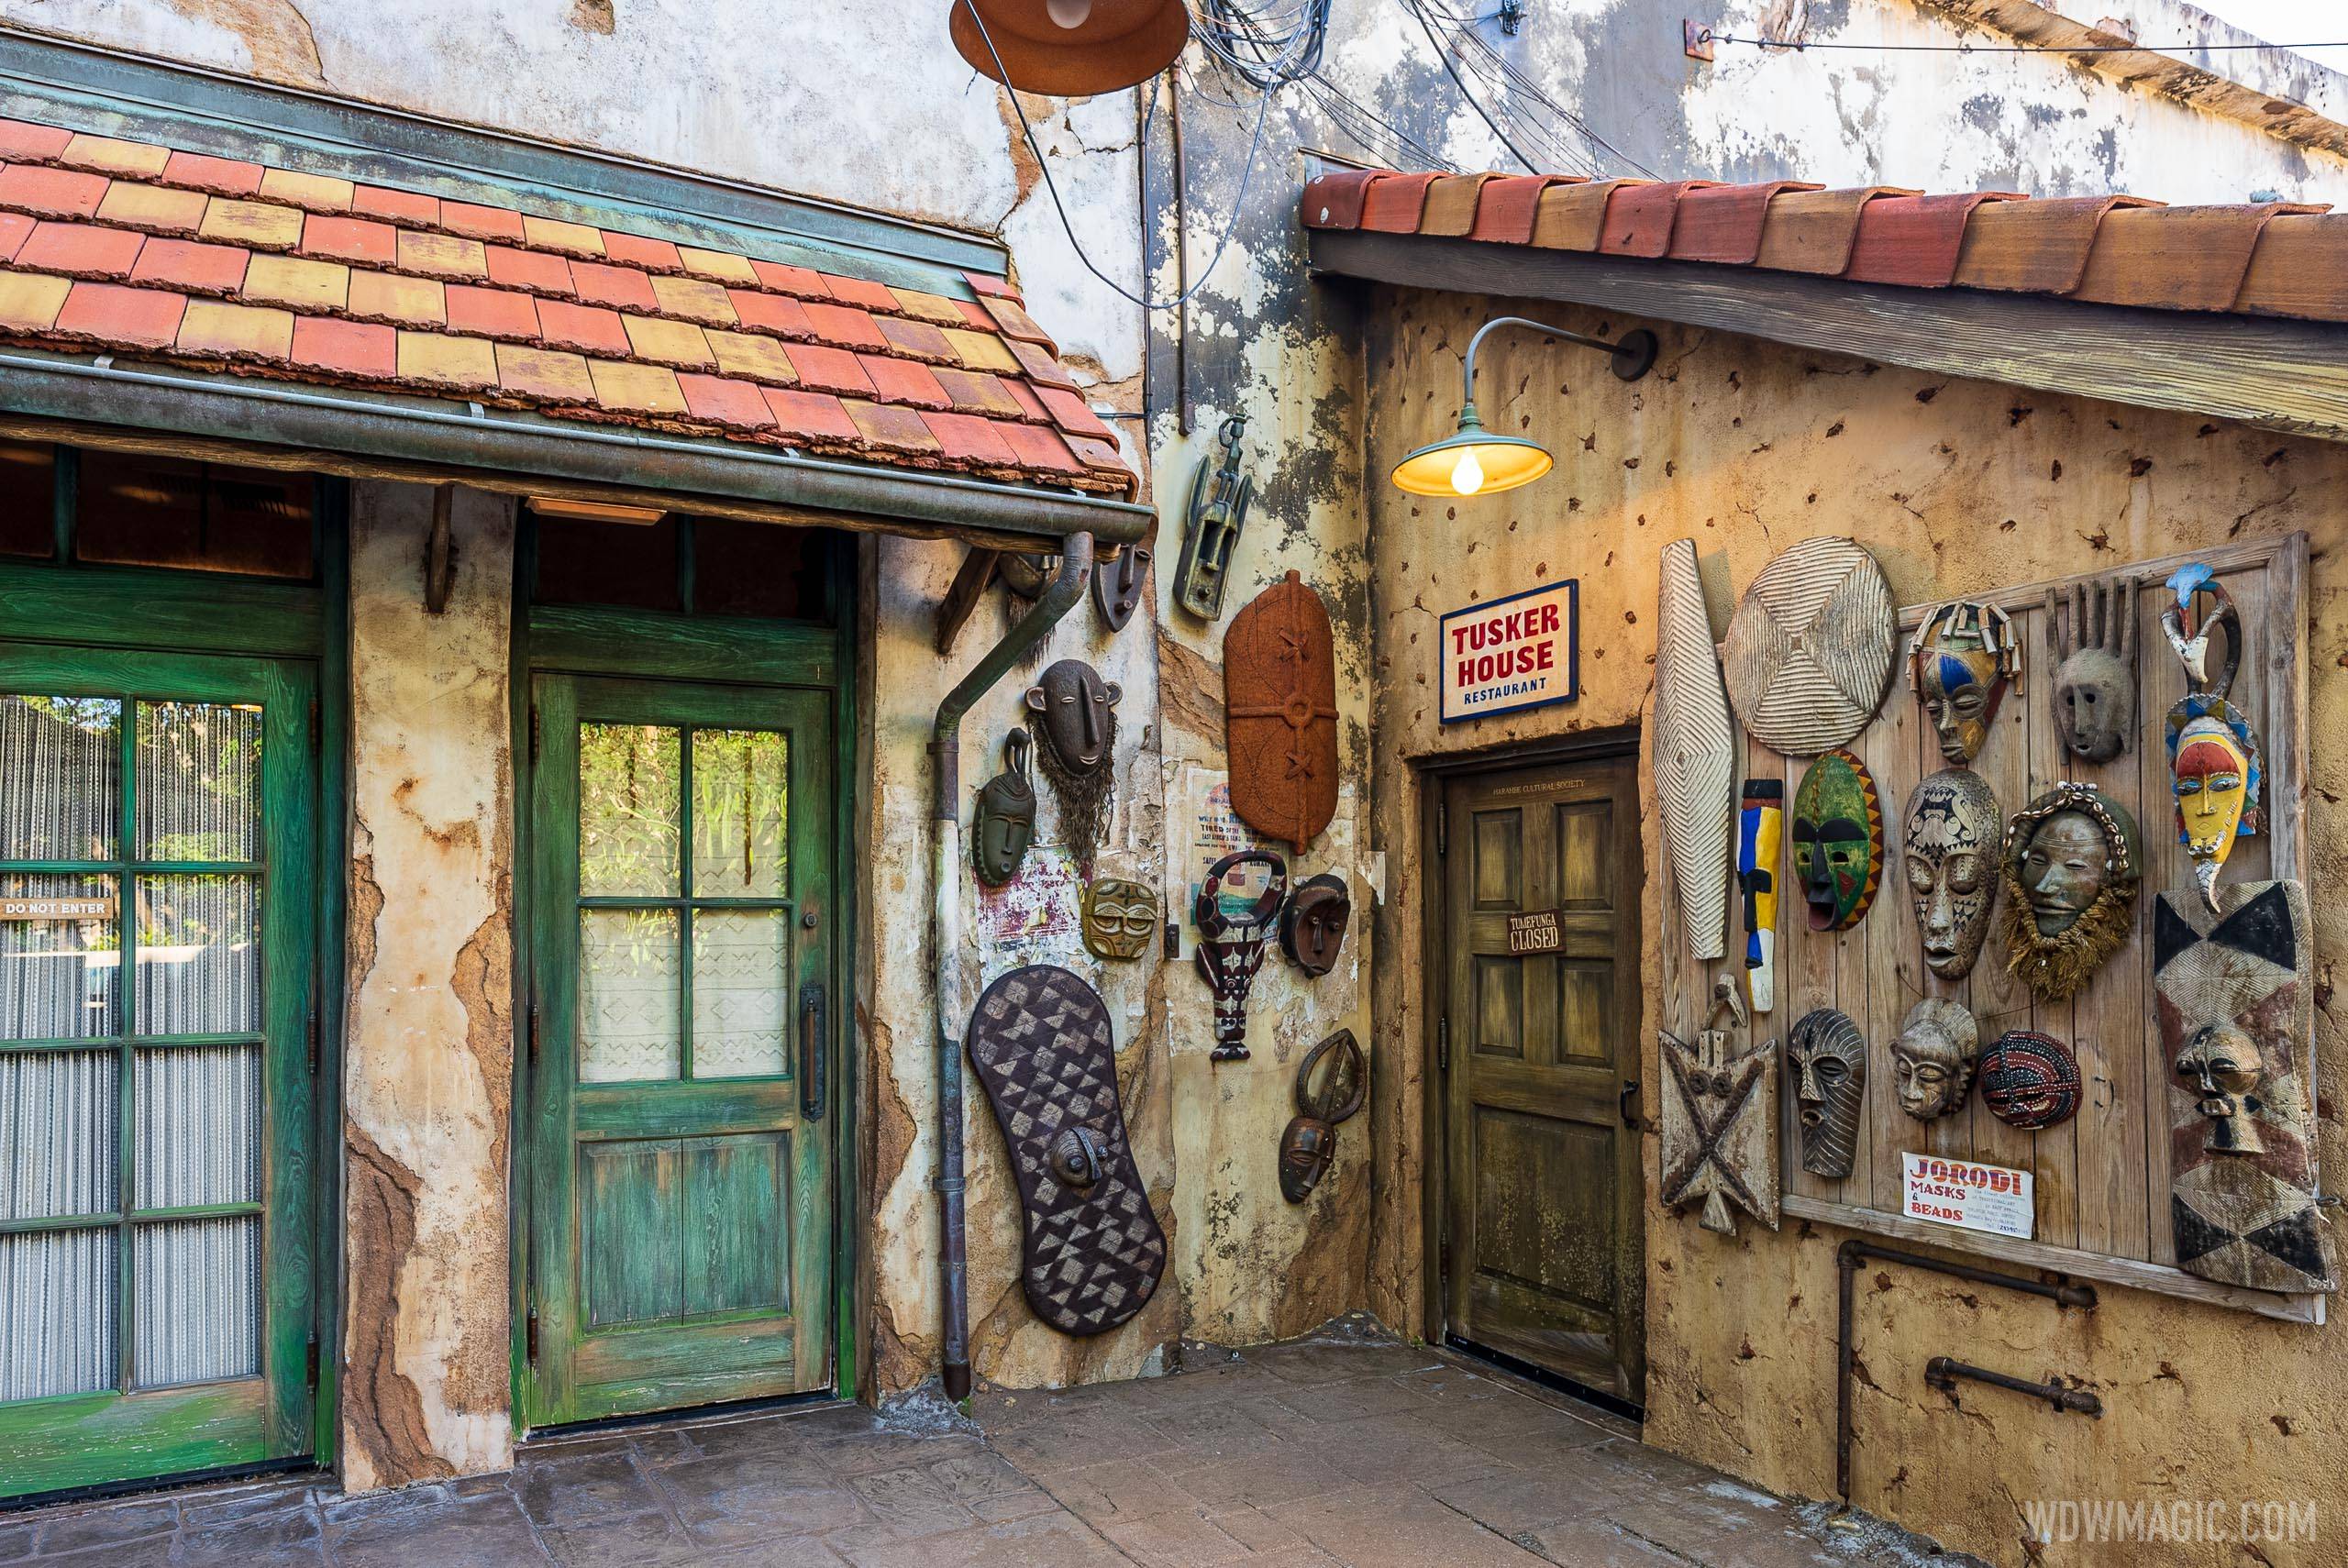 Tusker House has recently reopened at Disney's Animal Kingdom